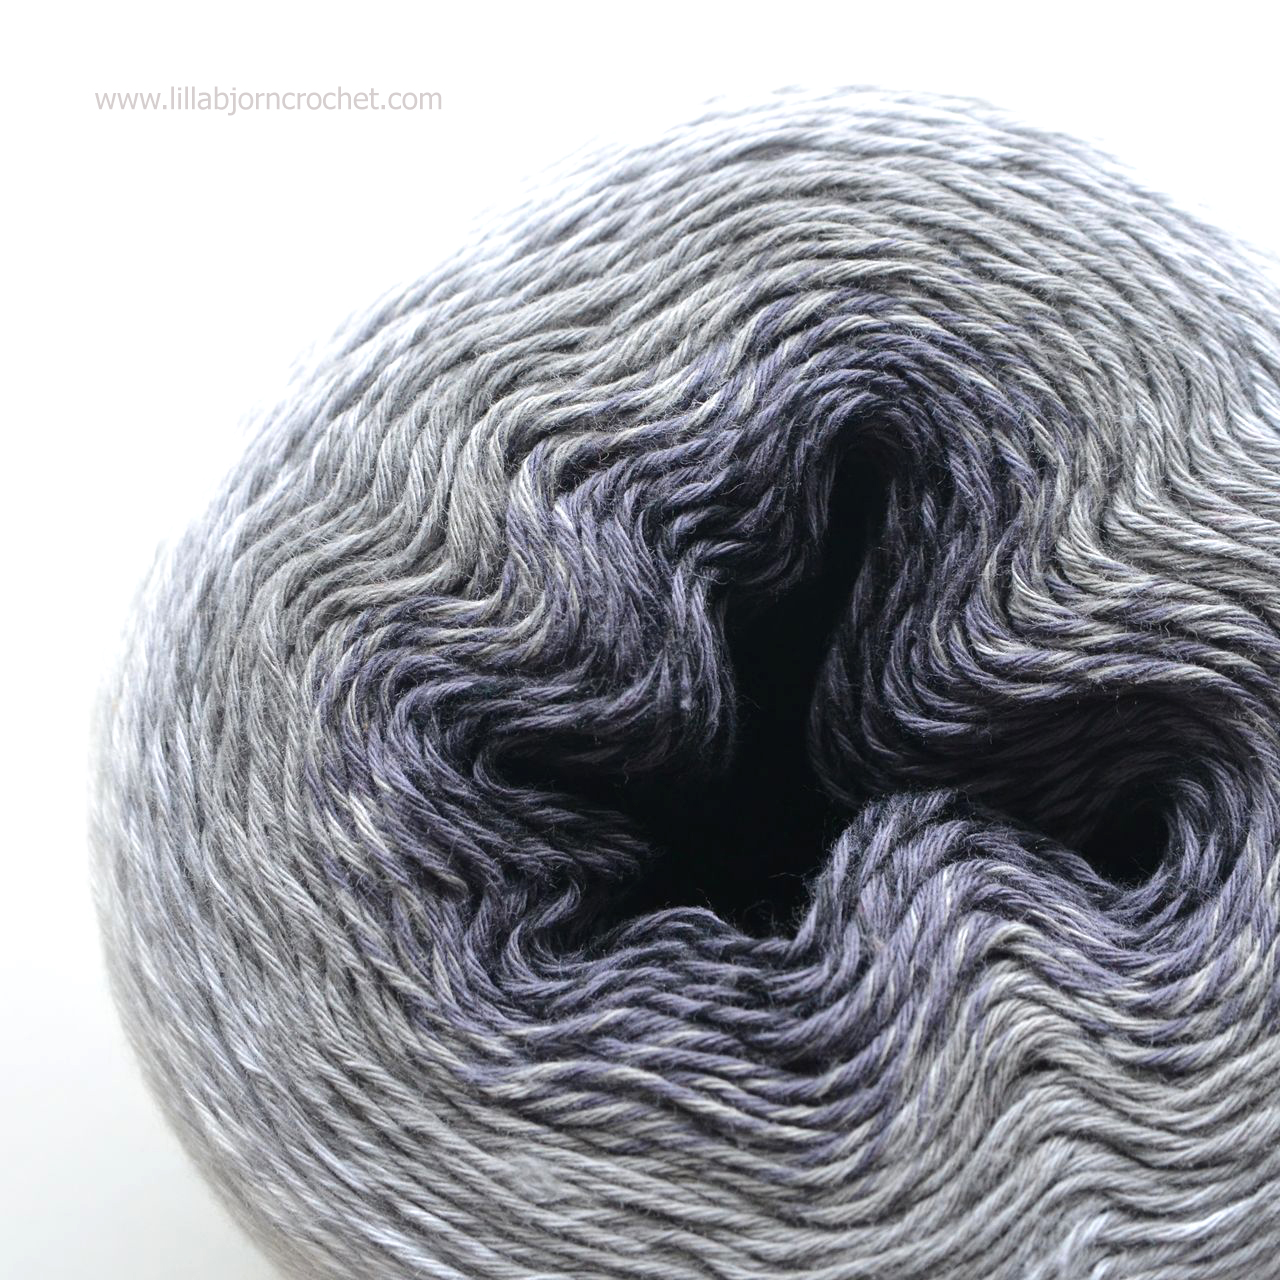 Whirl is a new yummy yarn by Scheepjes. Inspired by flavours of ice cream it comes in 12 gorgeous and soft gradient shades. Yarn review by Lilla Bjorn Crochet